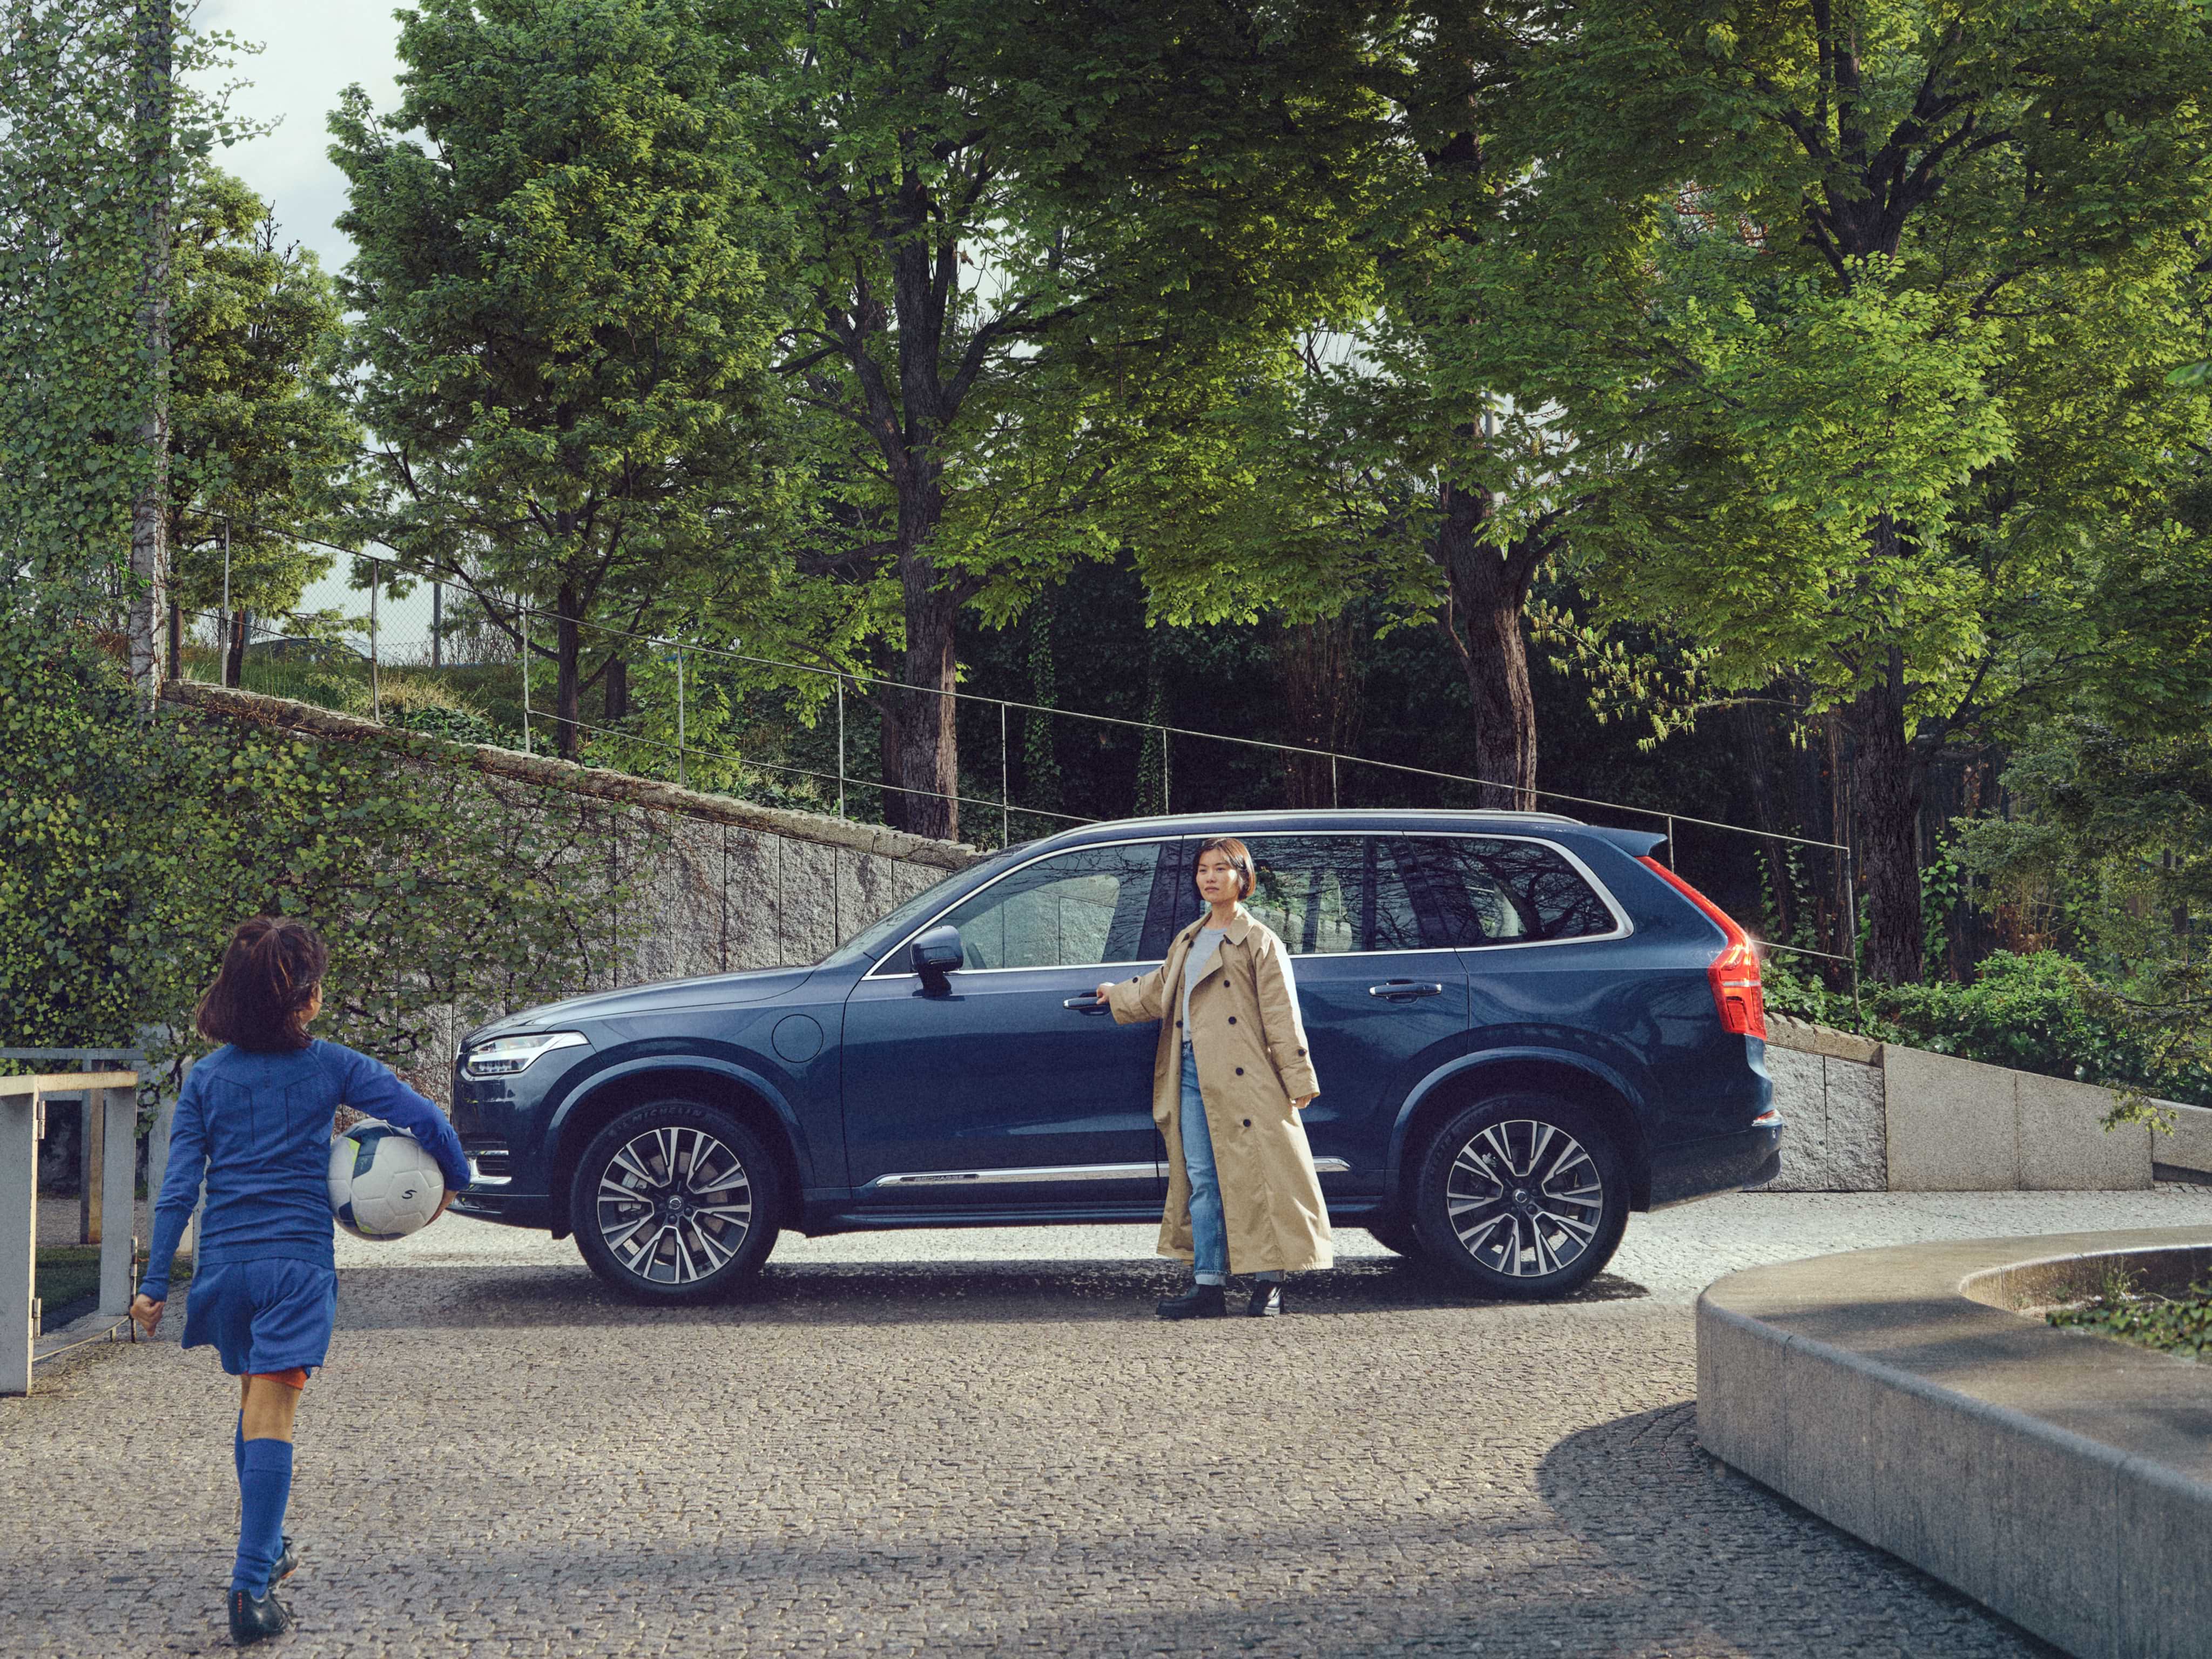 A mother stands near her Denim Blue Volvo XC90 as her daughter approaches, dressed for football practice and holding a ball.